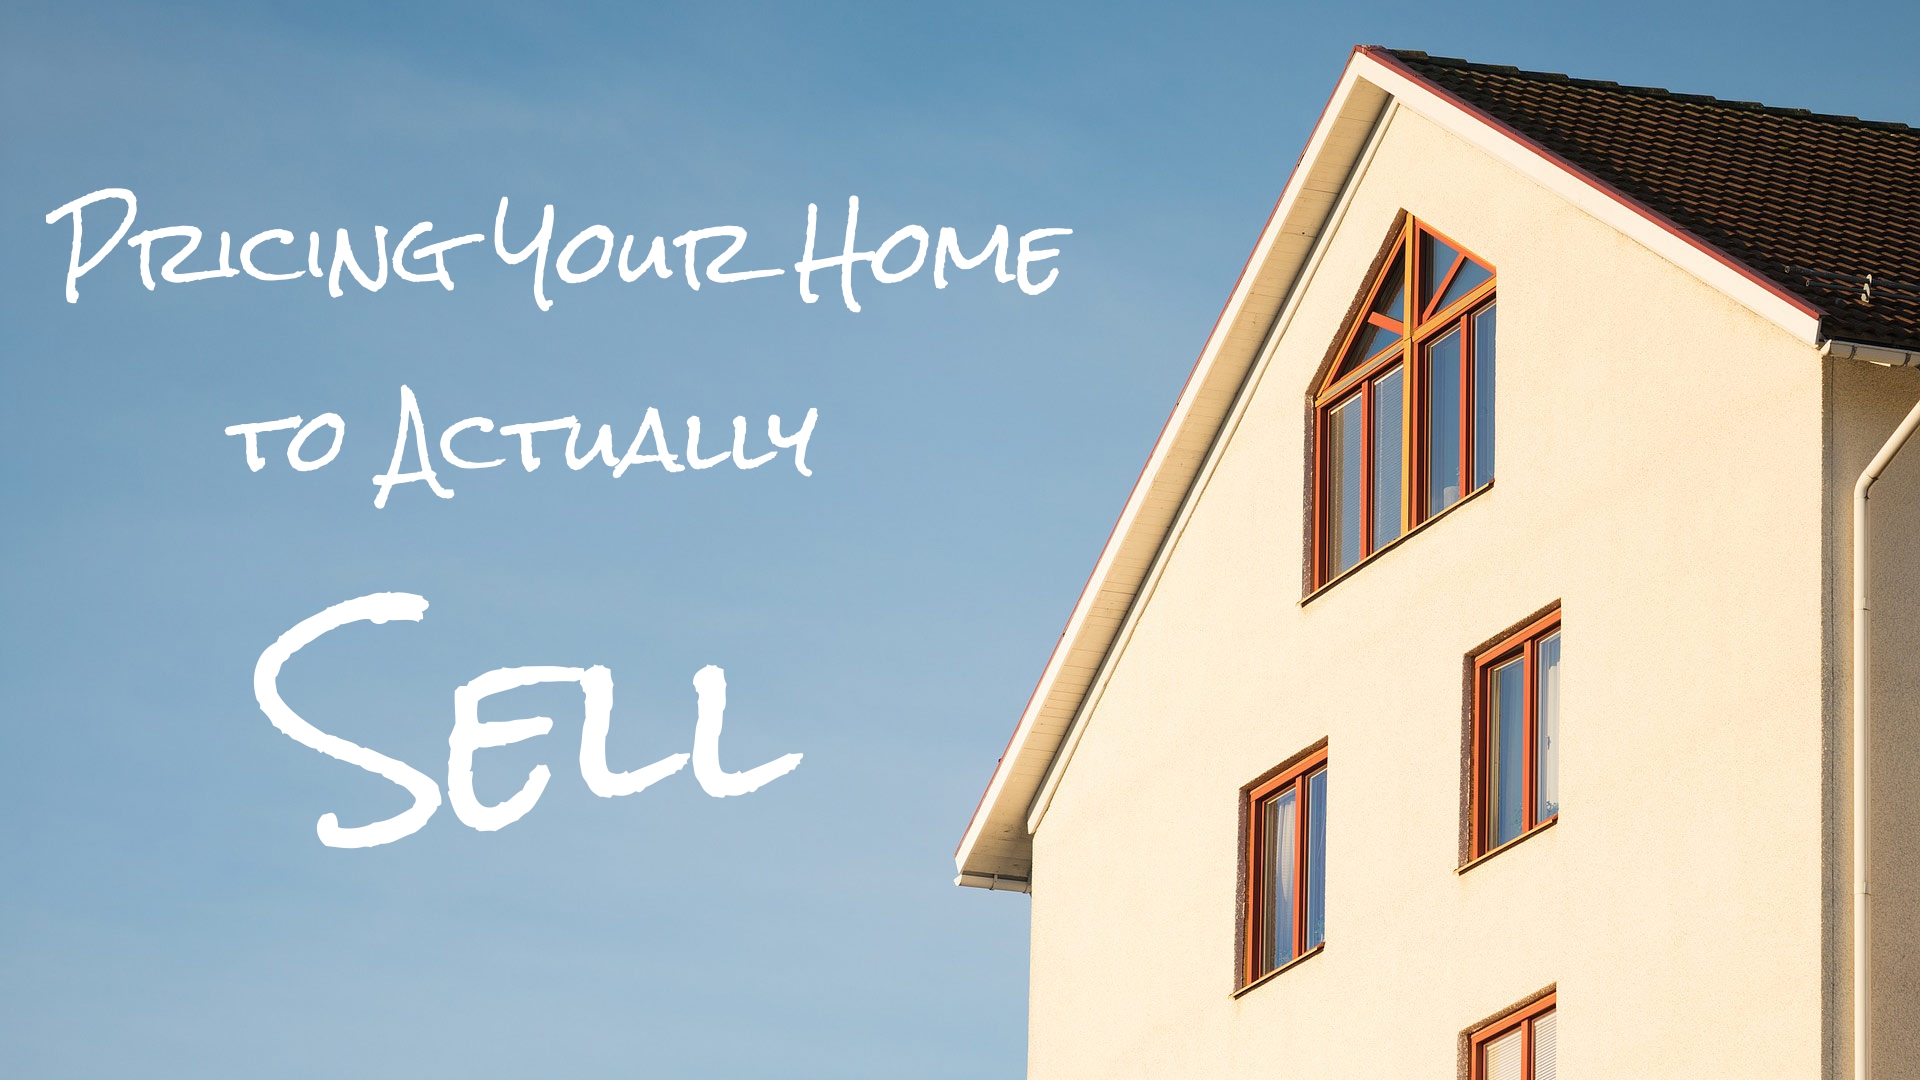 Pricing Your Home to Actually Sell